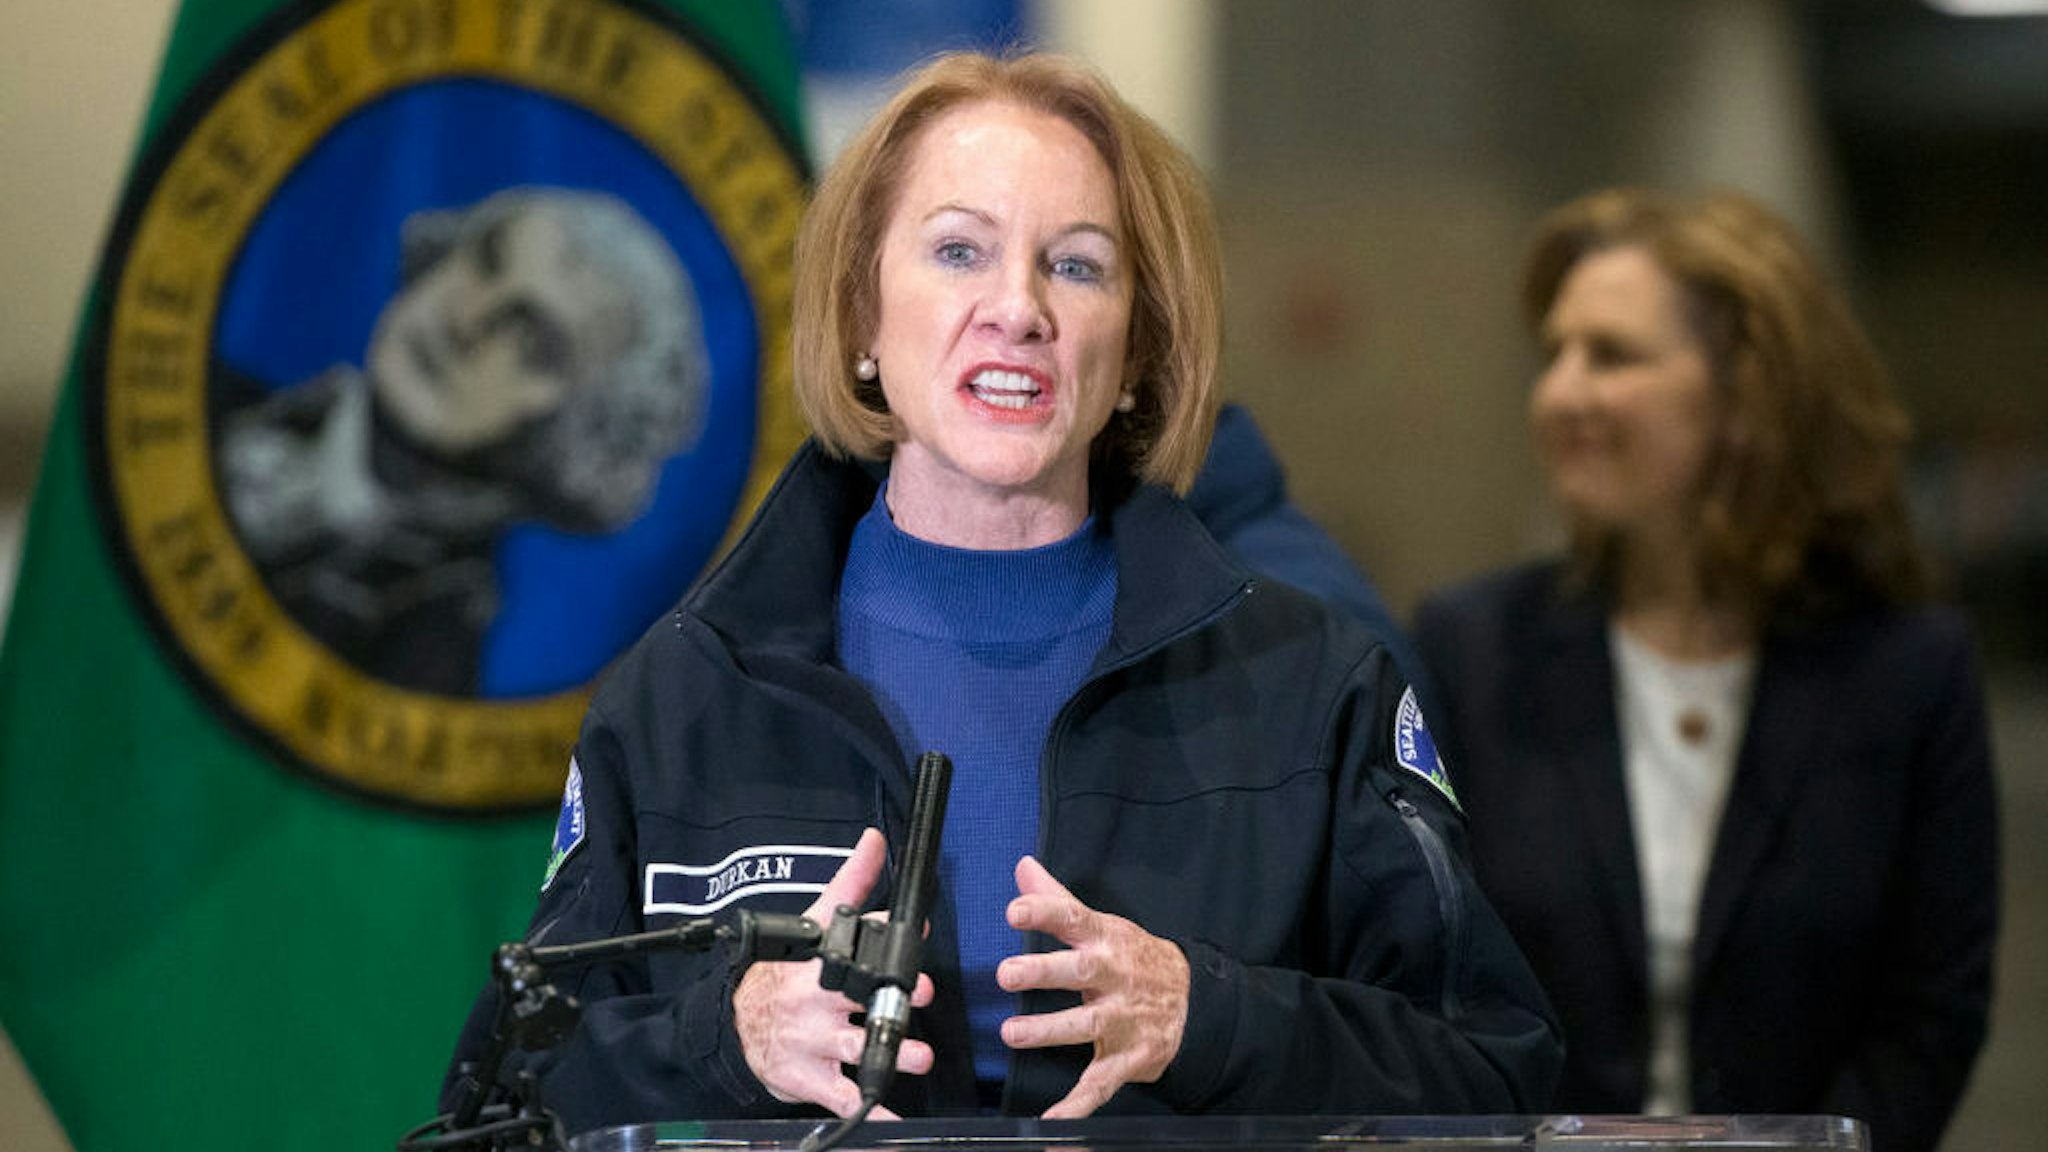 Seattle Mayor Jenny Durkan speaks at a press conference on March 28, 2020 in Seattle, Washington. The mayor and other leaders from Washington state discussed the deployment of a new field hospital at CenturyLink Field Event Center which is expected to create at least 150 hospital beds for non-COVID-19 cases and will include 300 soldiers from the 627th Army Hospital at Fort Carson, Colorado. (Photo by Karen Ducey/Getty Images)